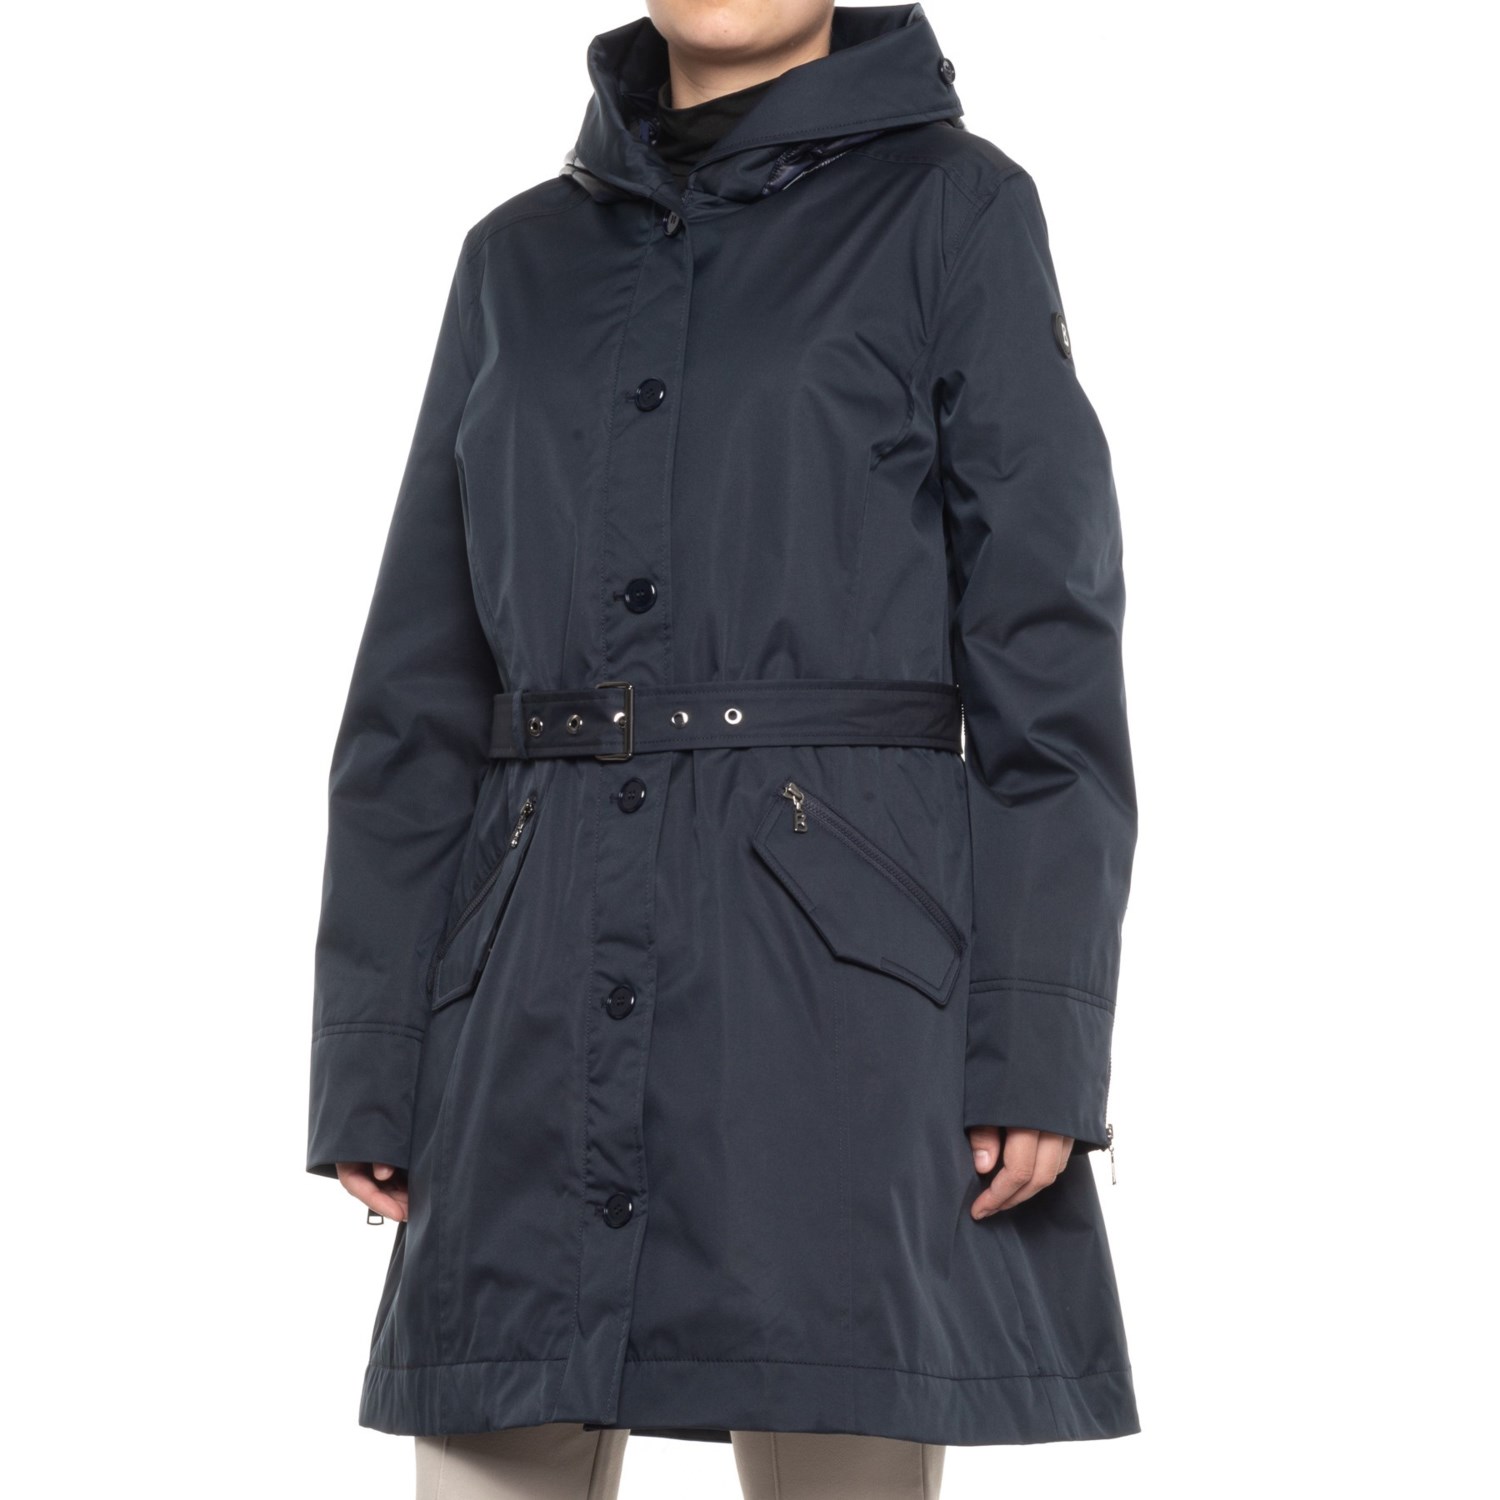 Bogner Marcy Trench Coat (For Women) - Save 60%